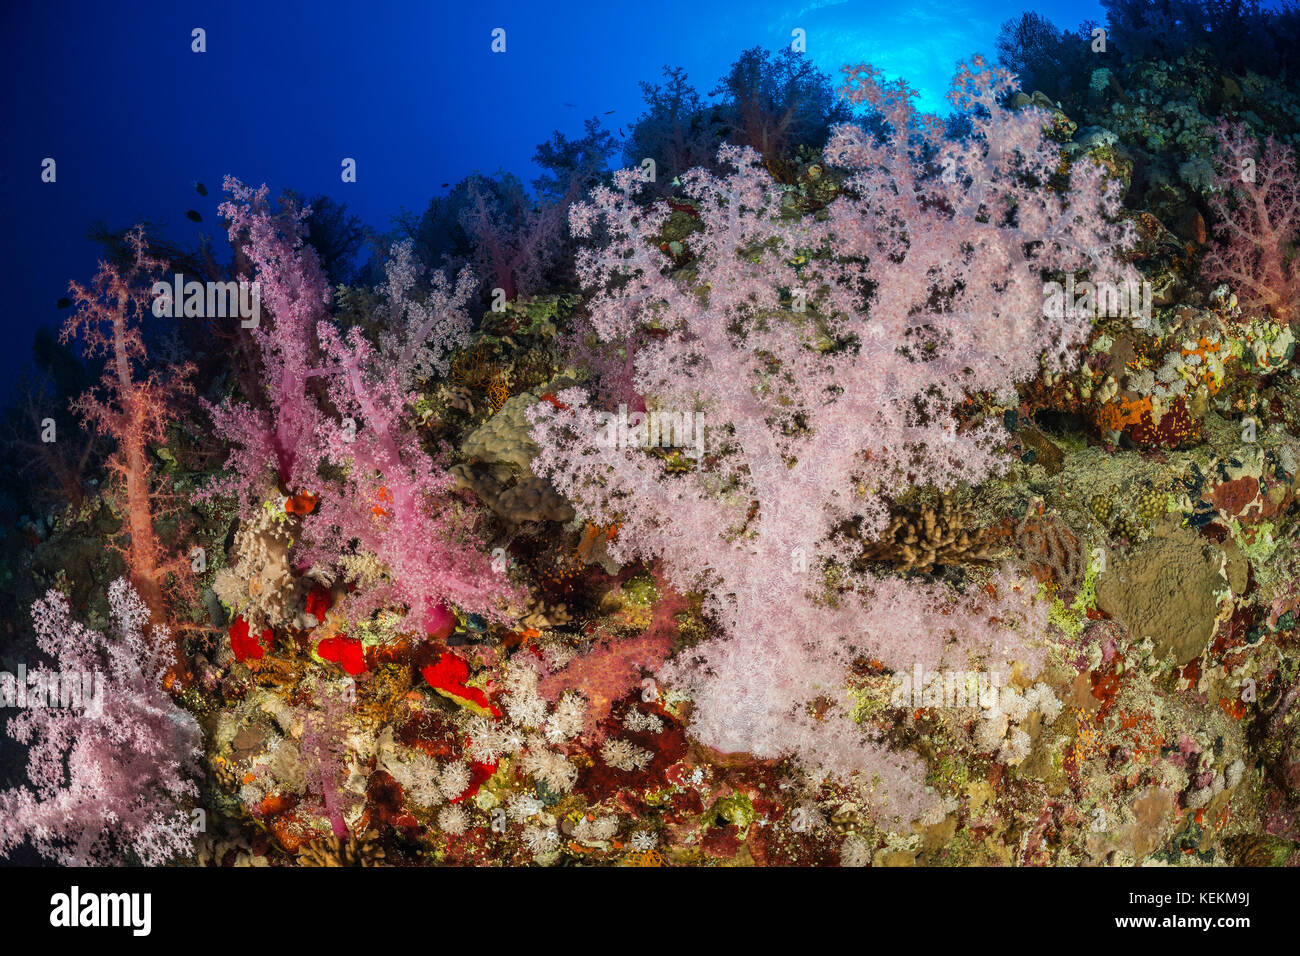 Colored Soft Coral, Dendronephthya klunzingeri, Elphinstone Reef, Red Sea, Egypt Stock Photo